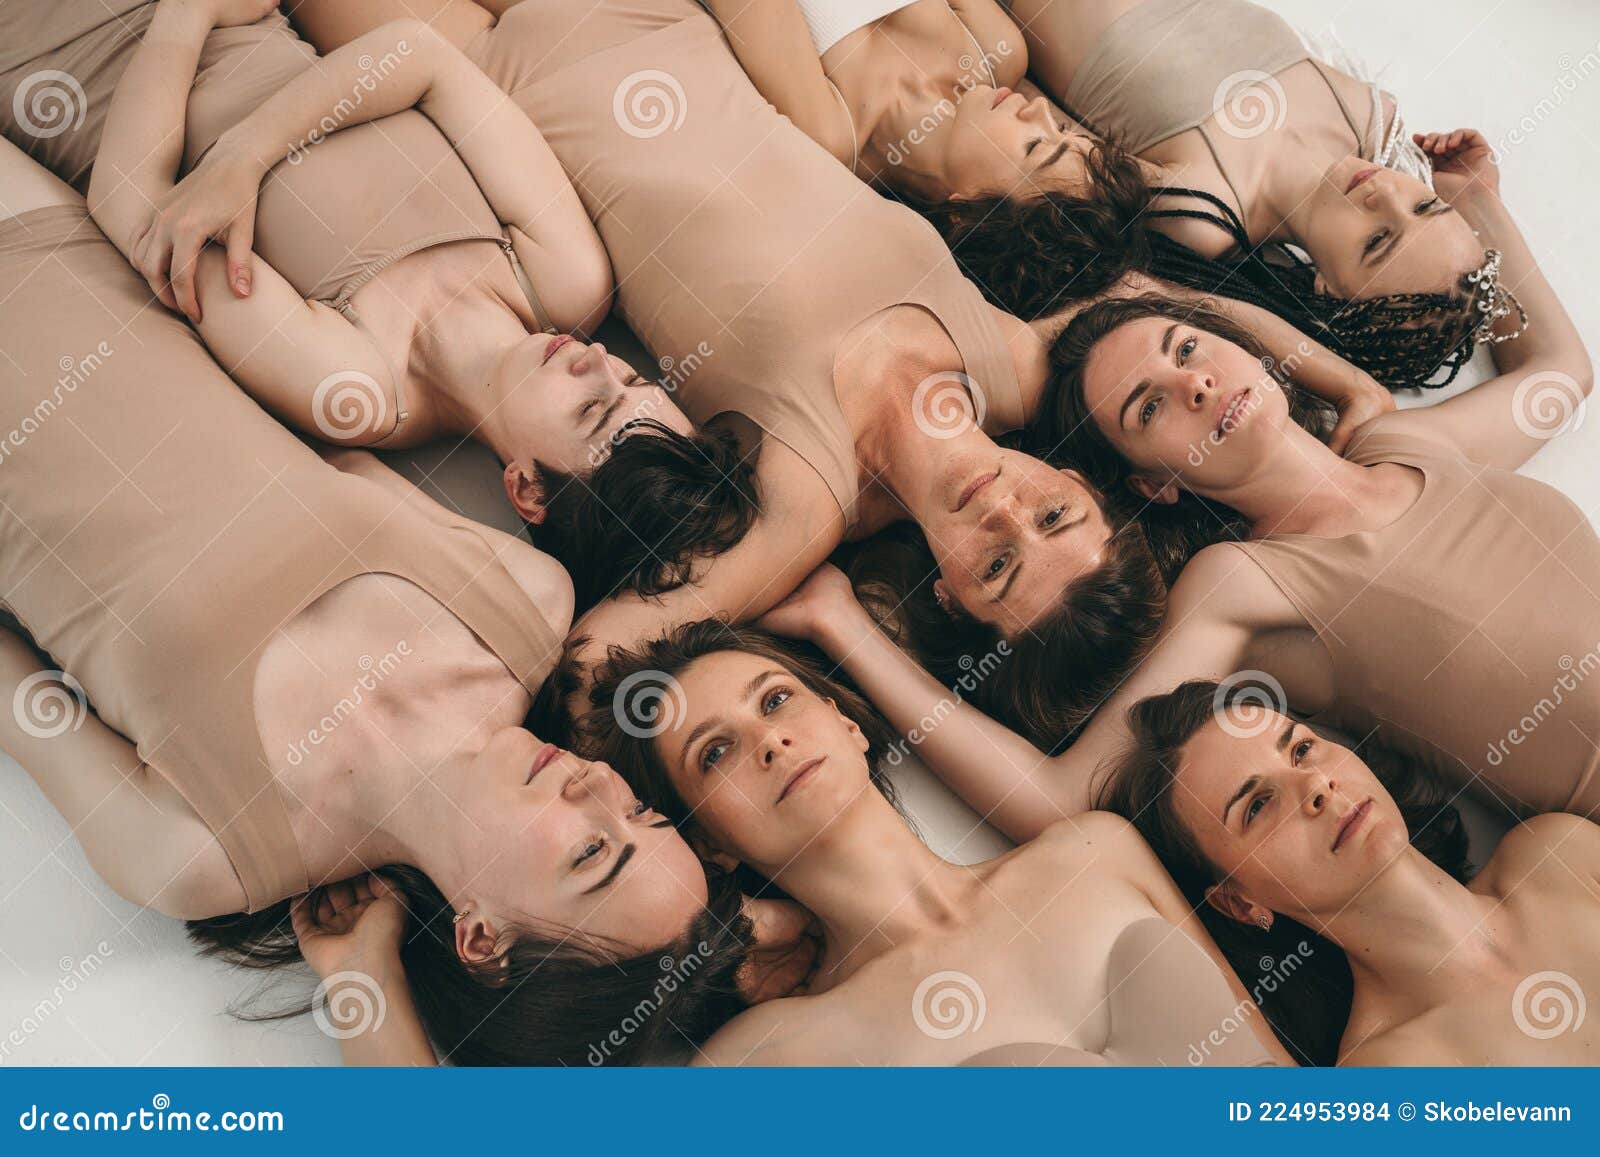 Hot Desnudo Schnappt Models Without Clothes